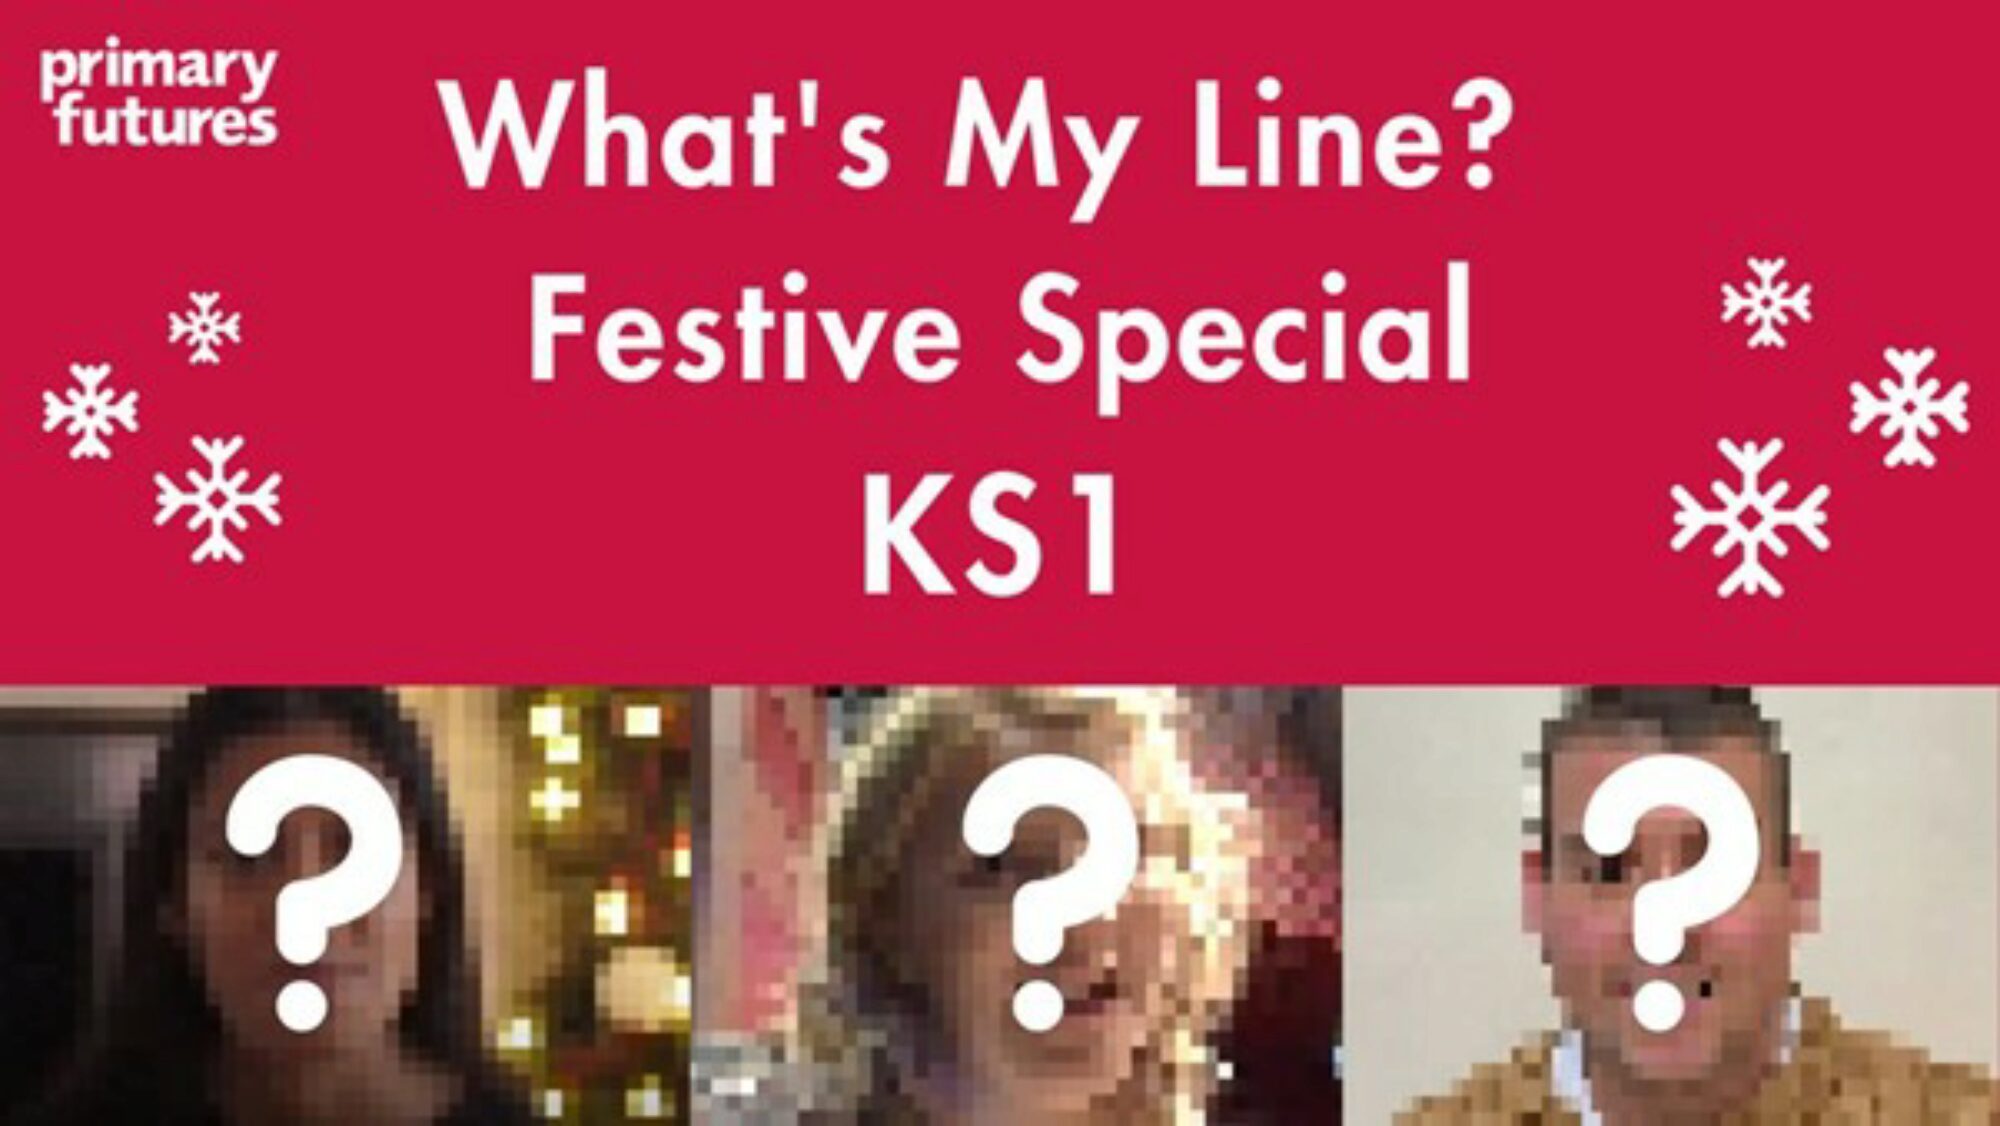 Festive Special ‘What’s My Line?’ pre-recorded resource (KS1)